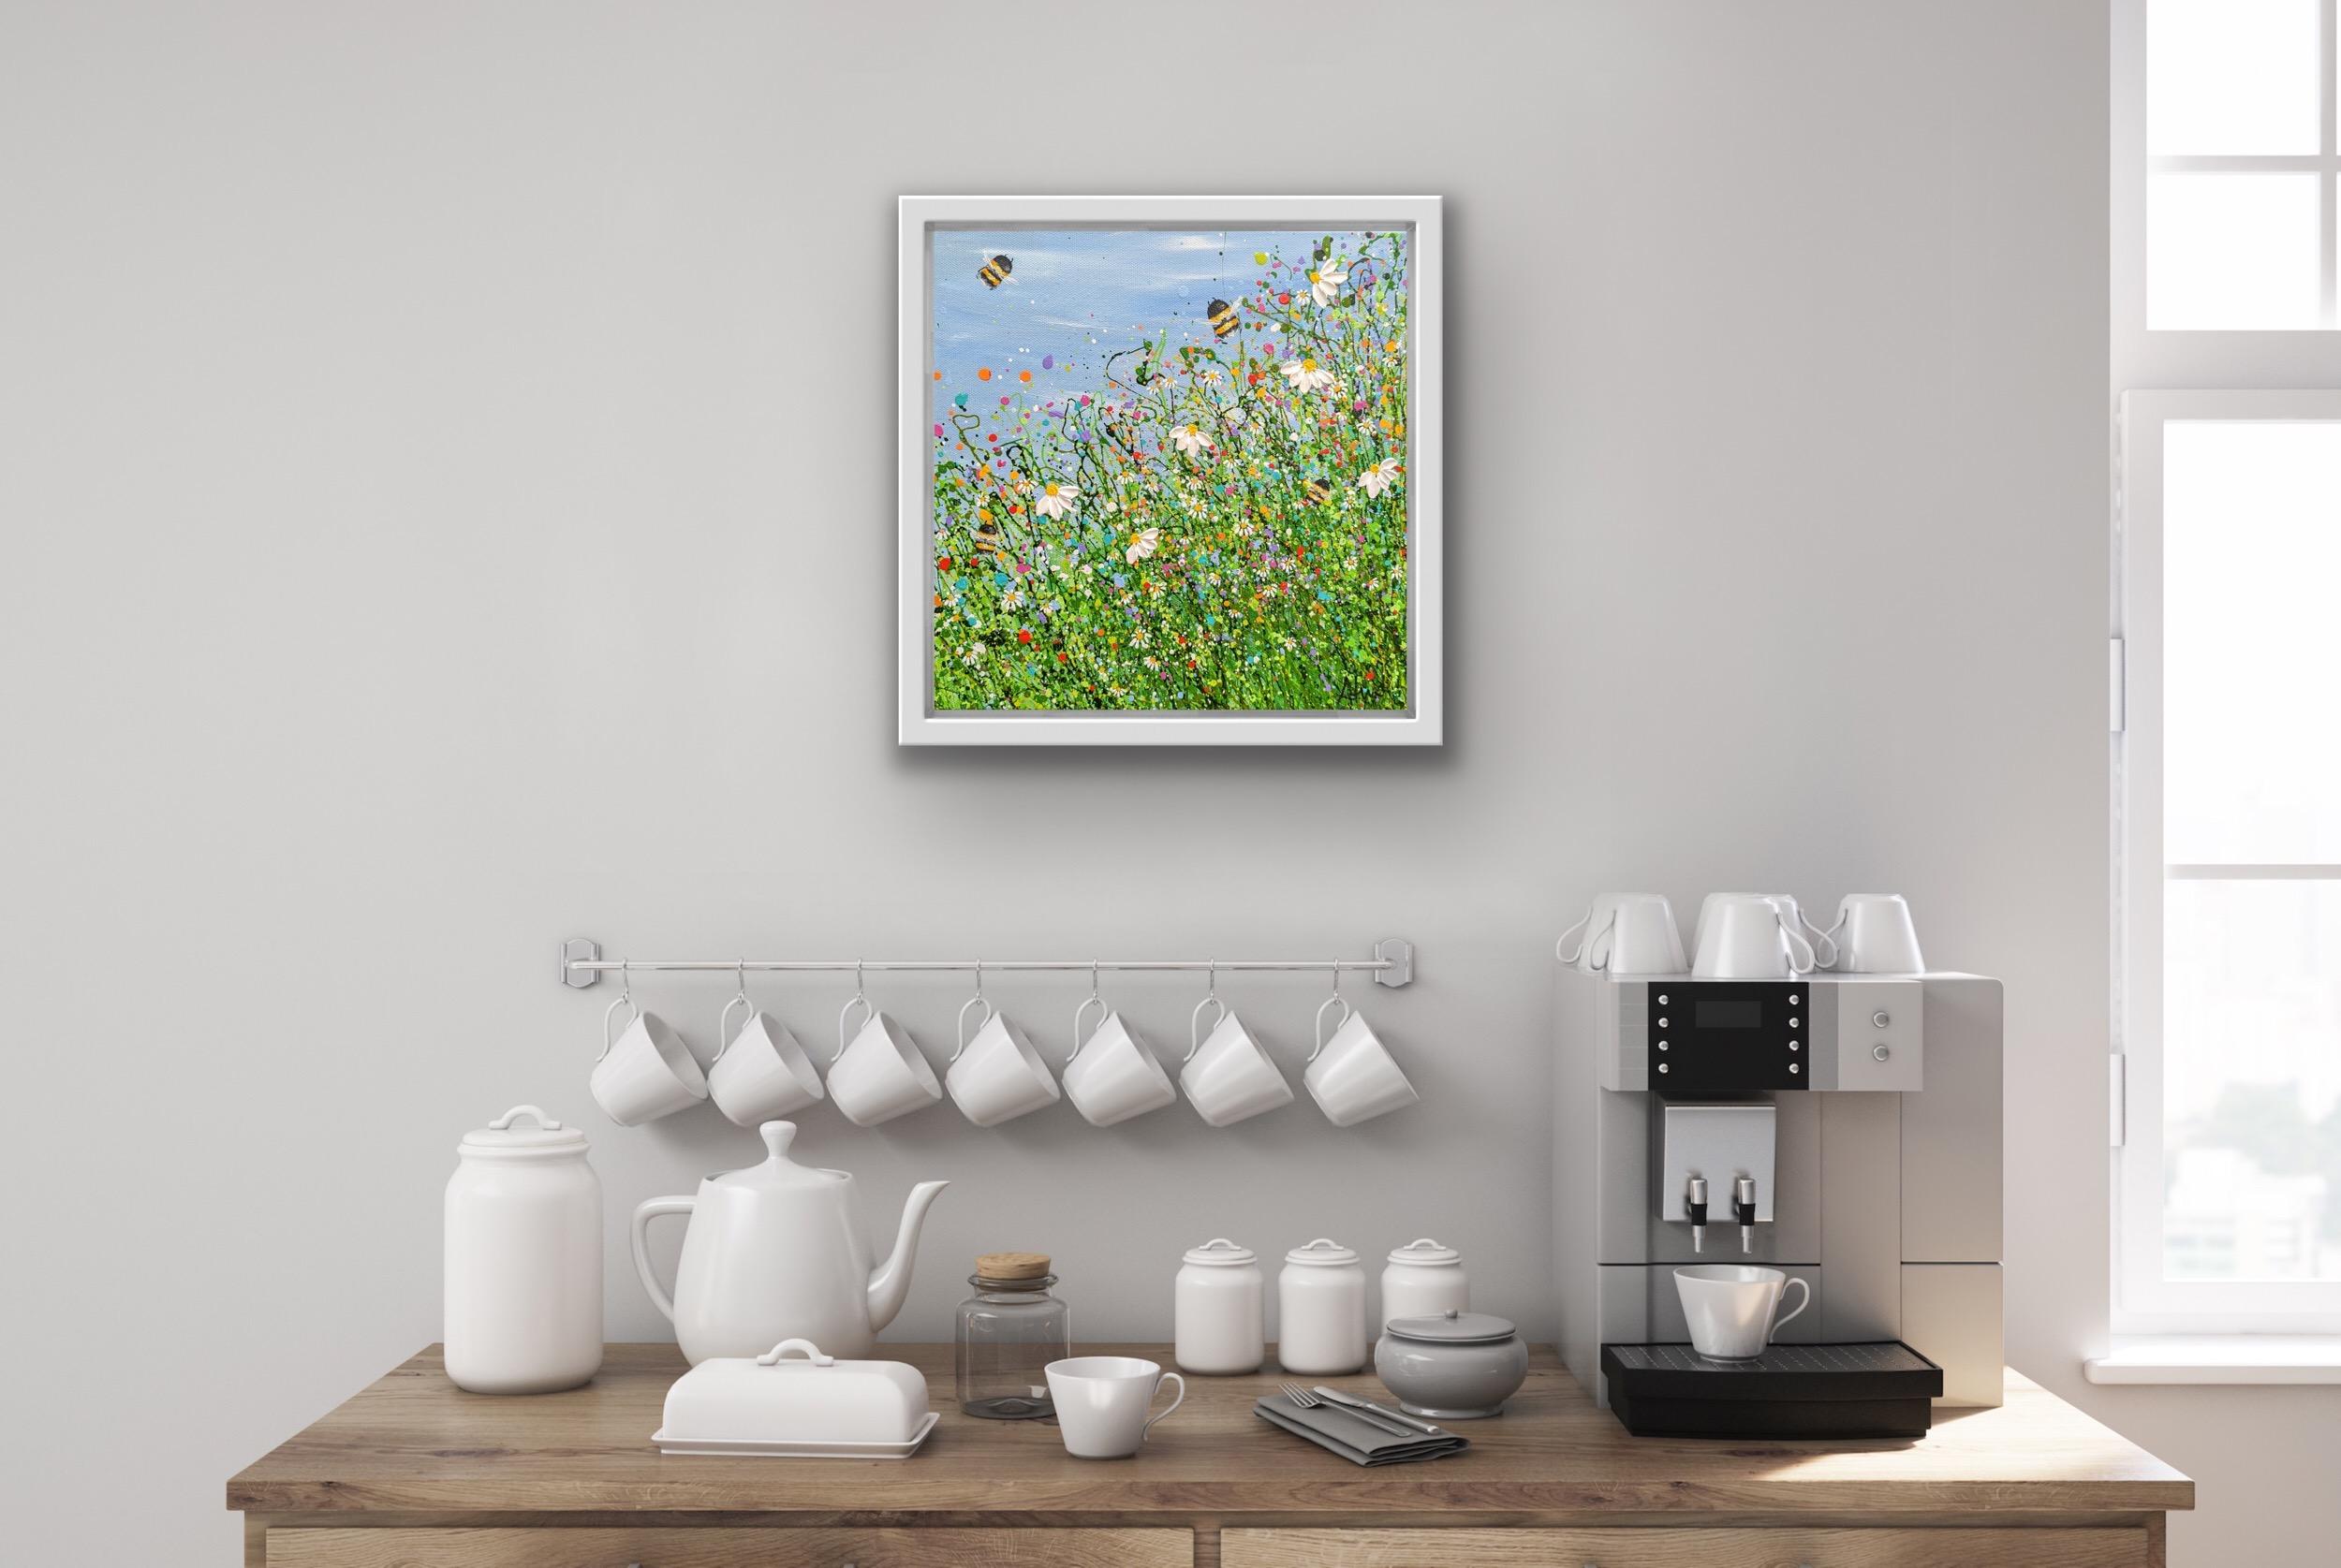 Bumbling Meadows 2, Abstract Floral Painting, Original Landscape Art, Nature - Gray Landscape Painting by Lucy Moore